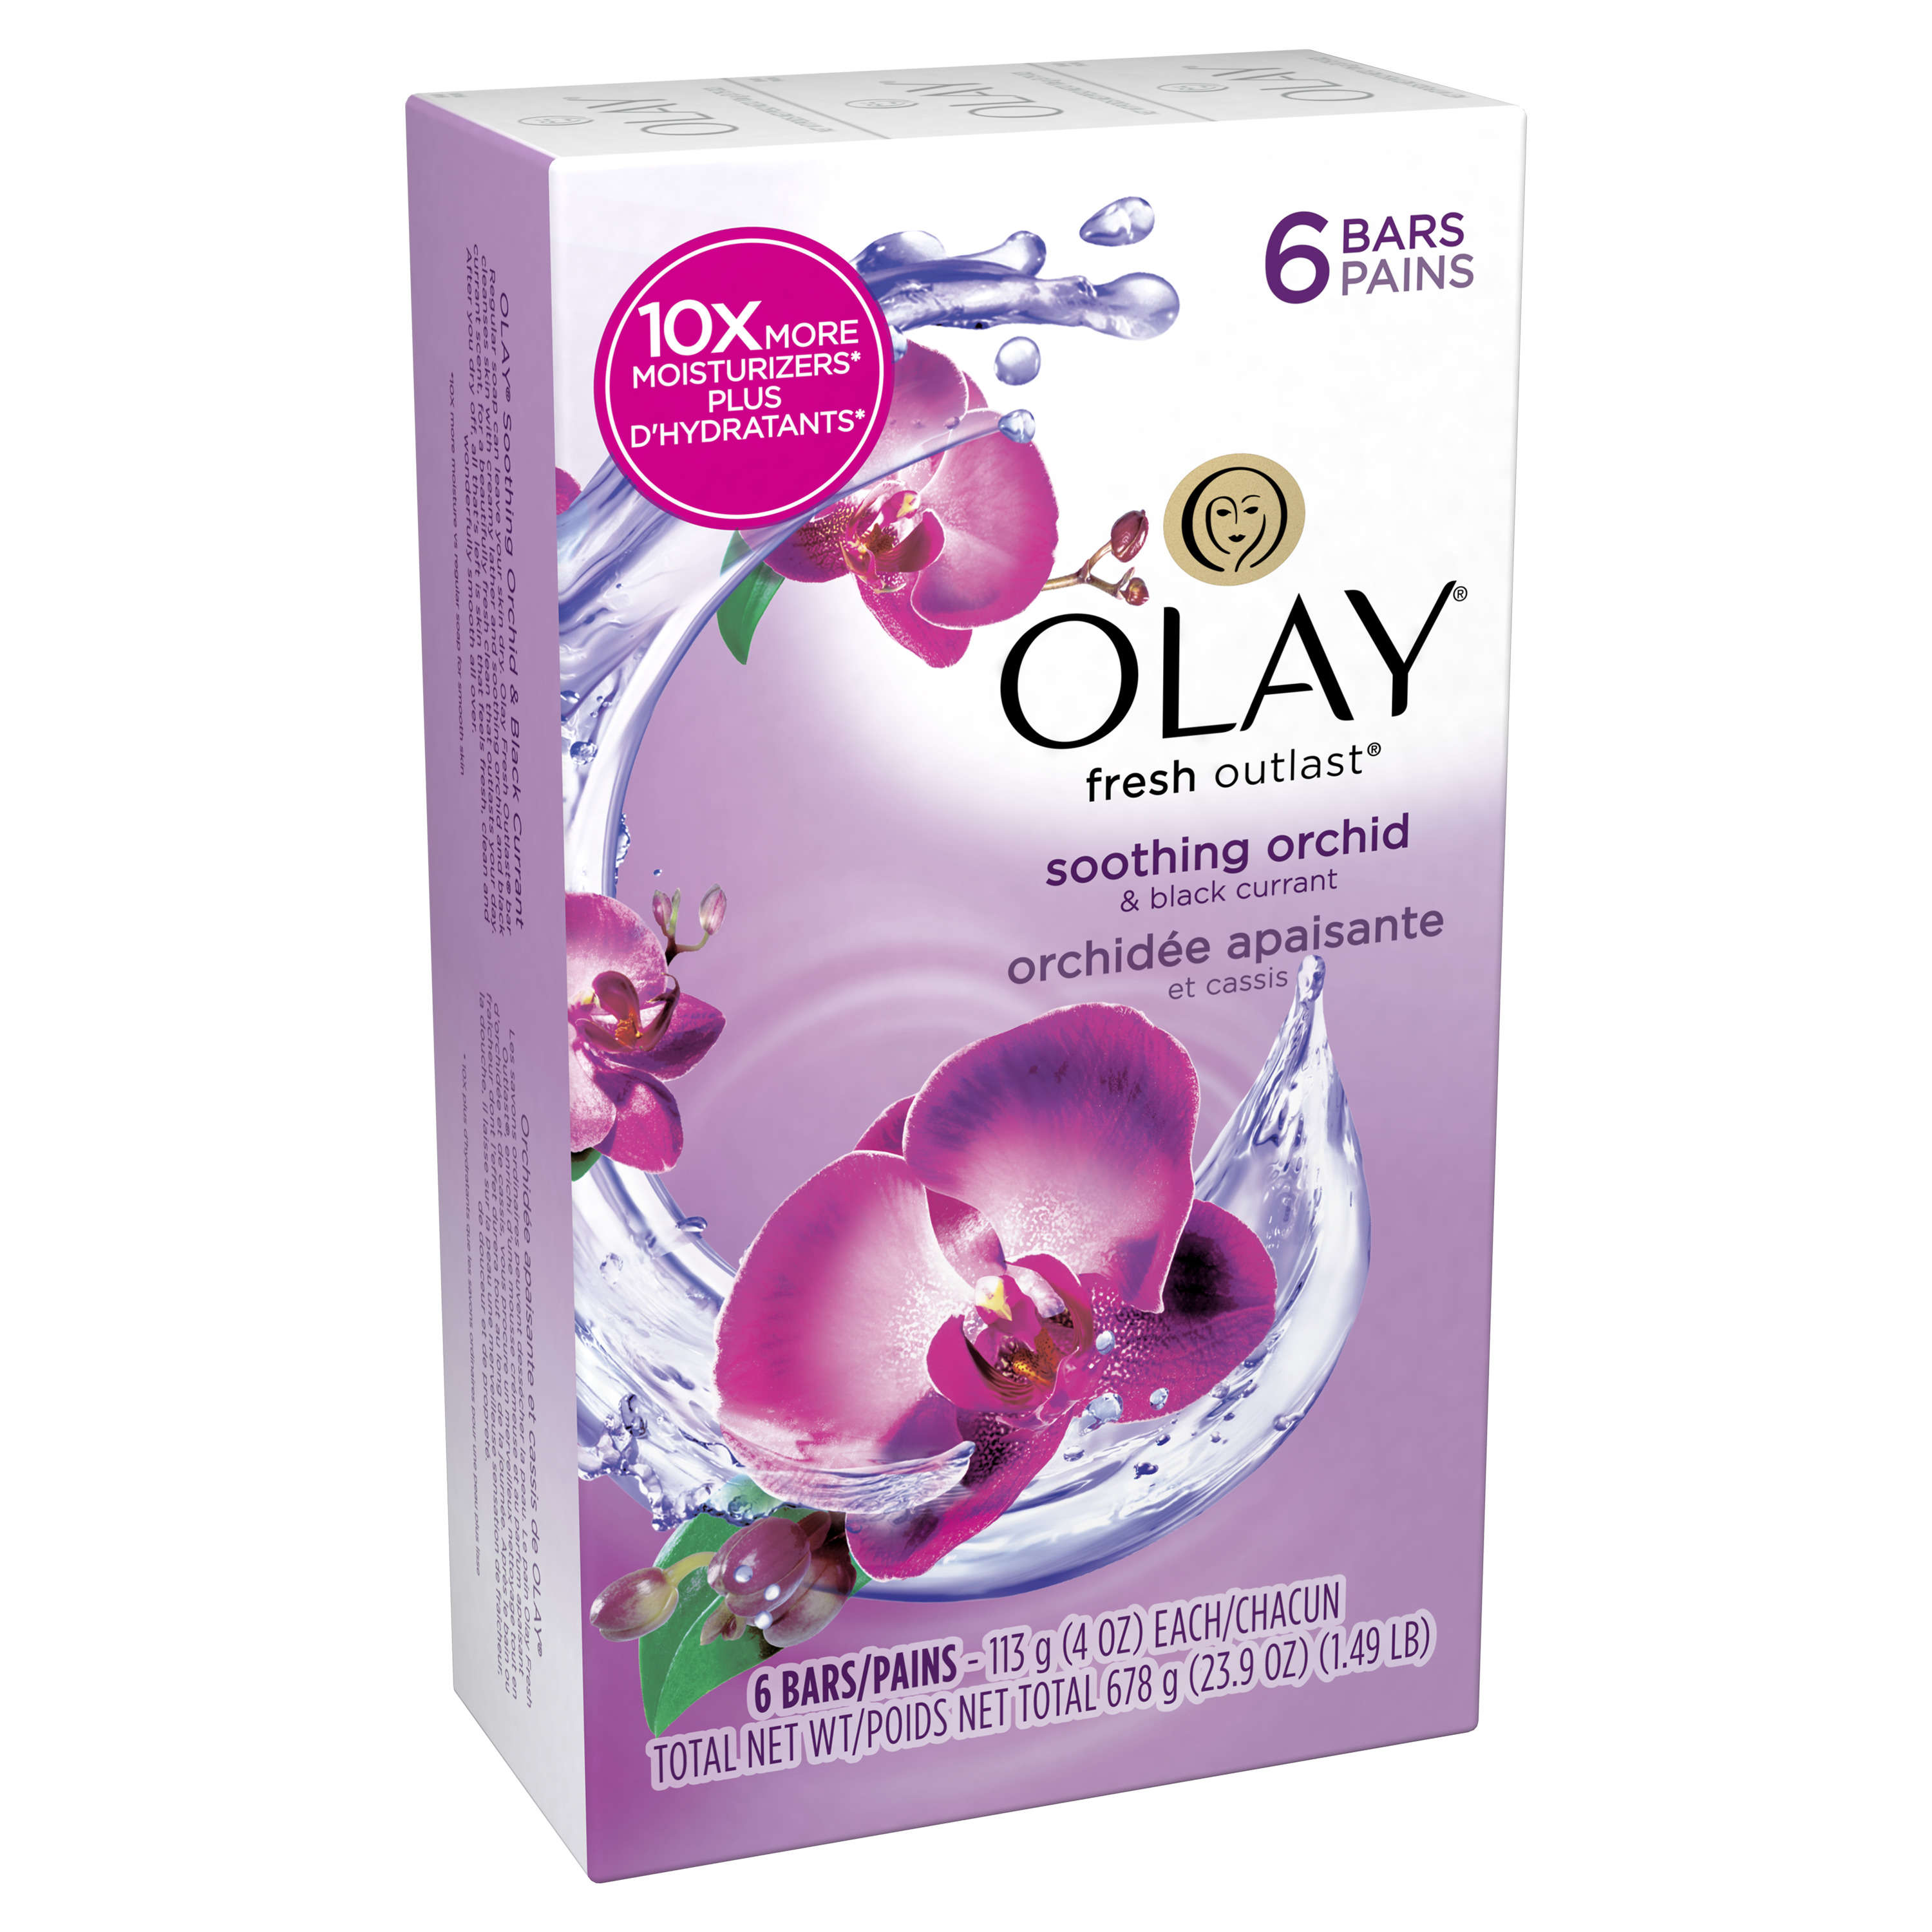 Olay Fresh Outlast Soothing Orchid & Black Currant Beauty Bar 4 oz, 6 count - image 7 of 8